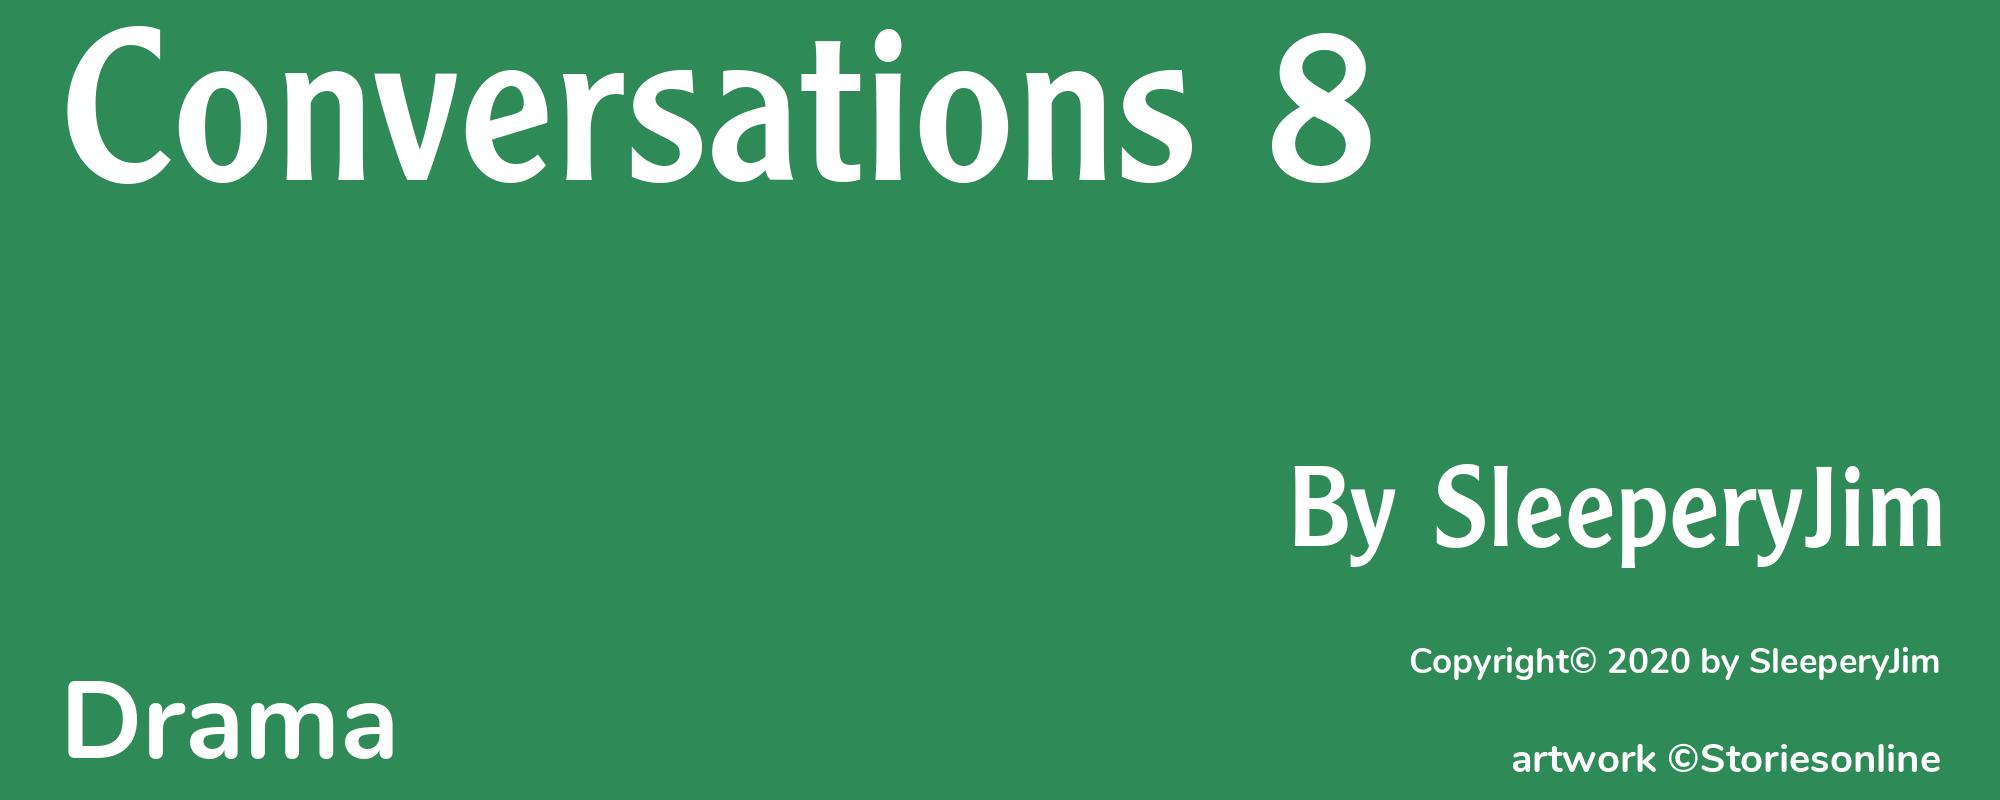 Conversations 8 - Cover